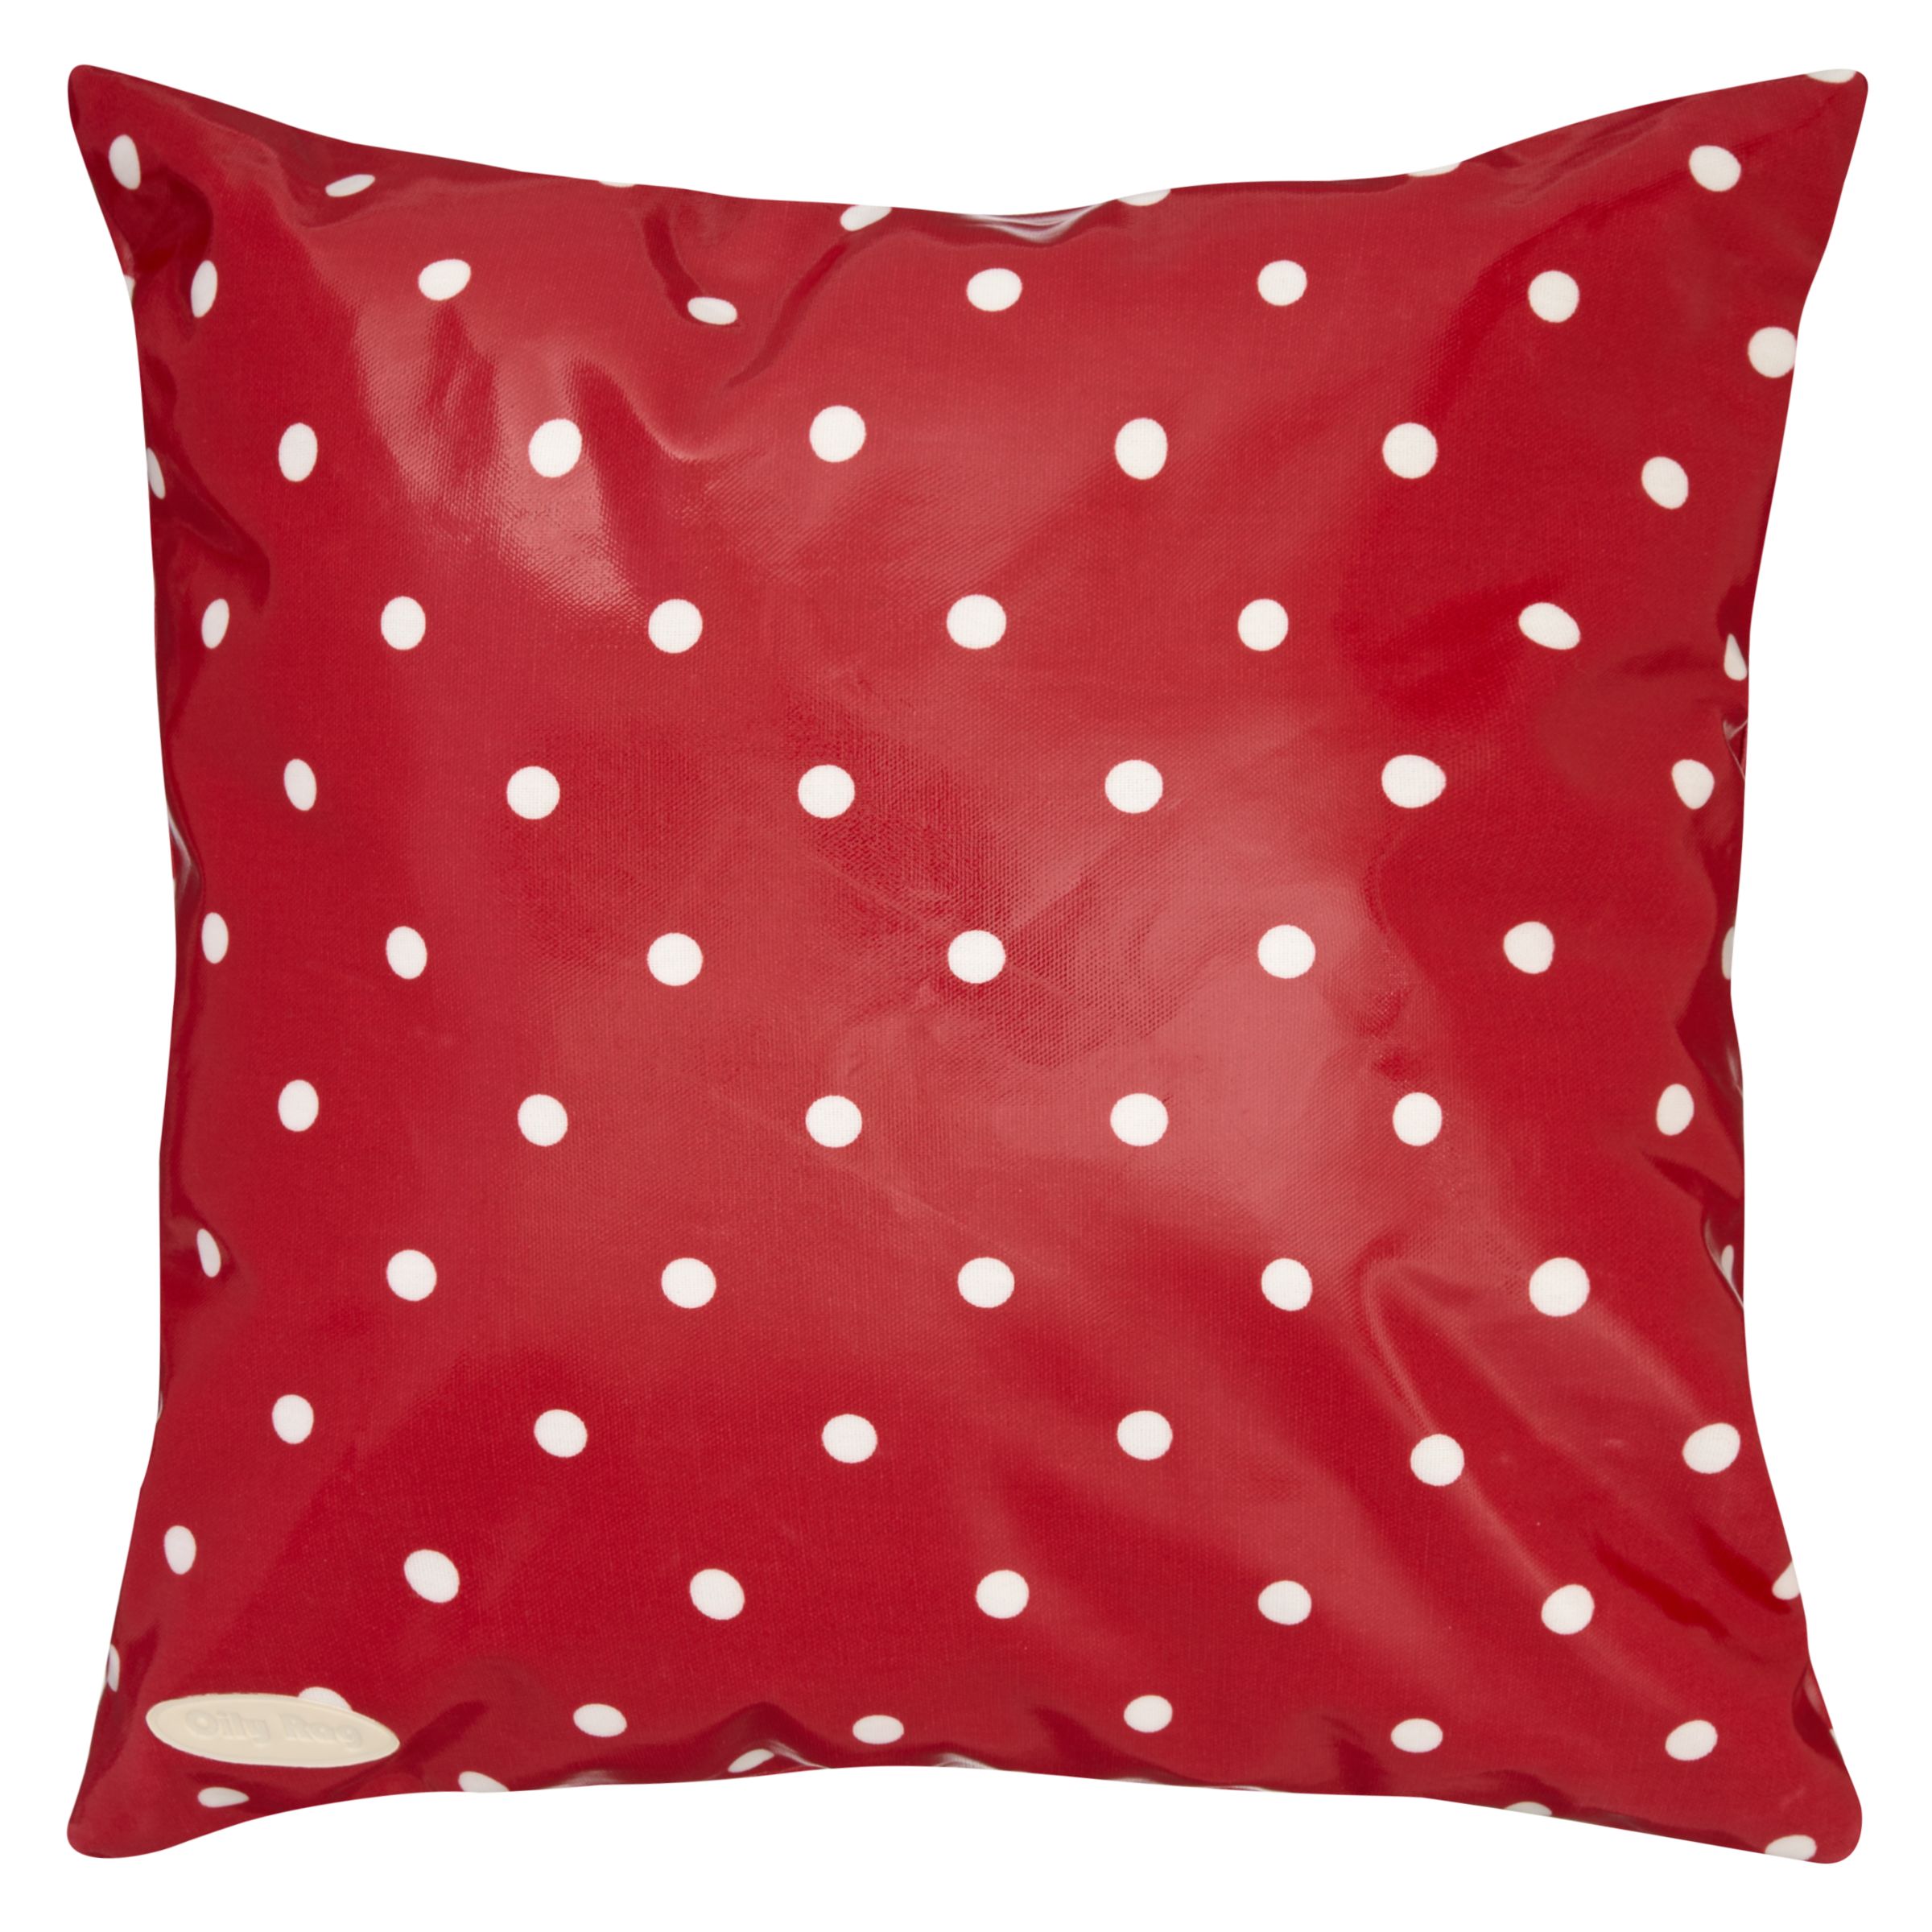 Oily Rag Spotty Outdoor Cushion, 40 x 40cm, Red